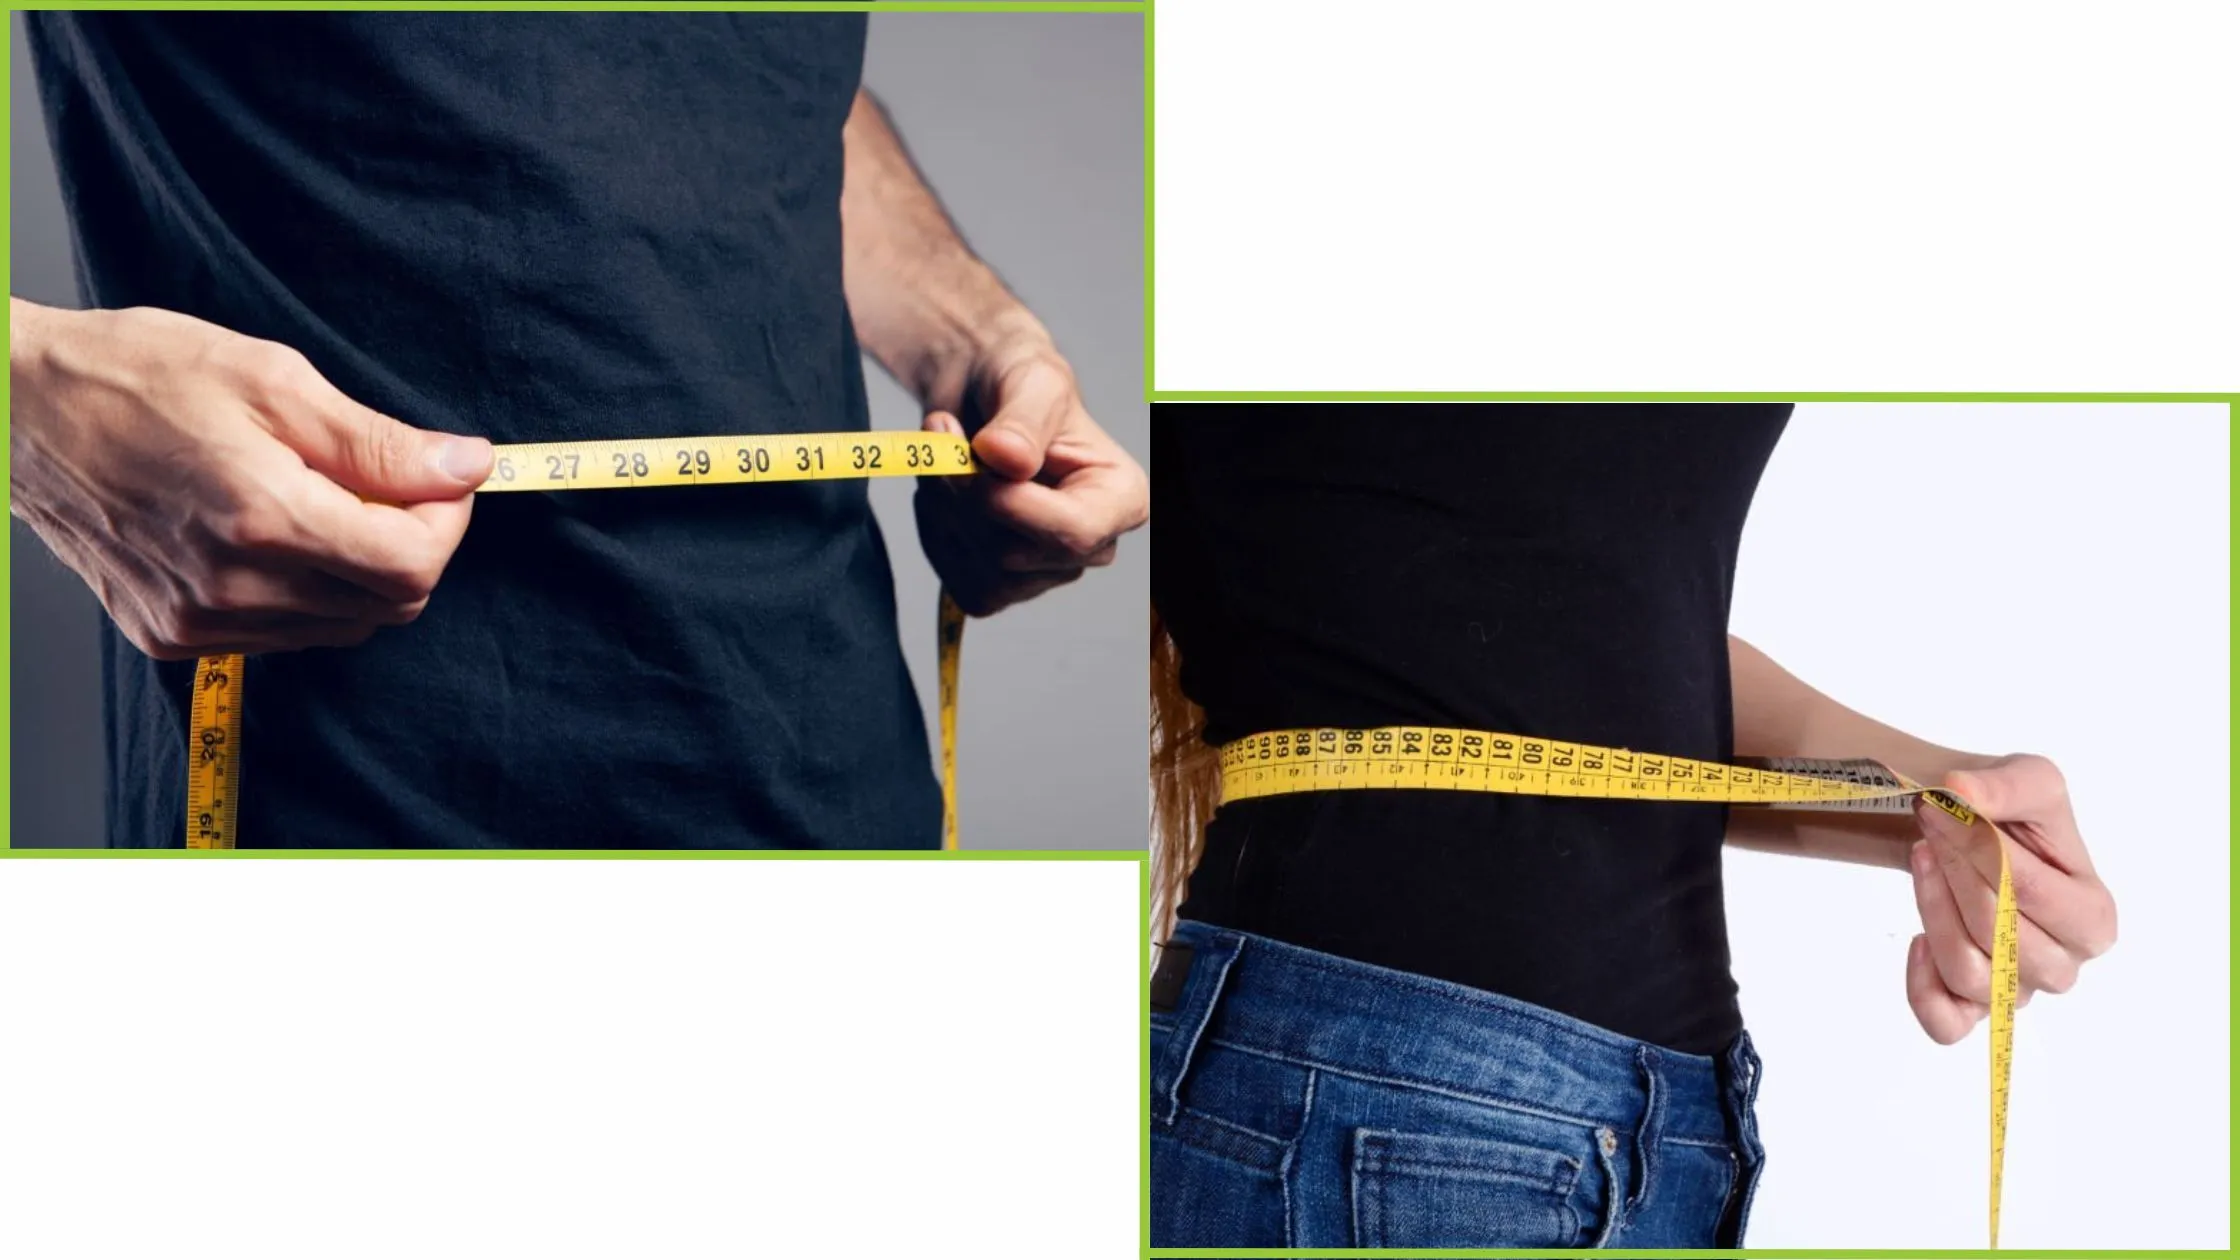 Men And Women Taking Measurements For Weight Loss